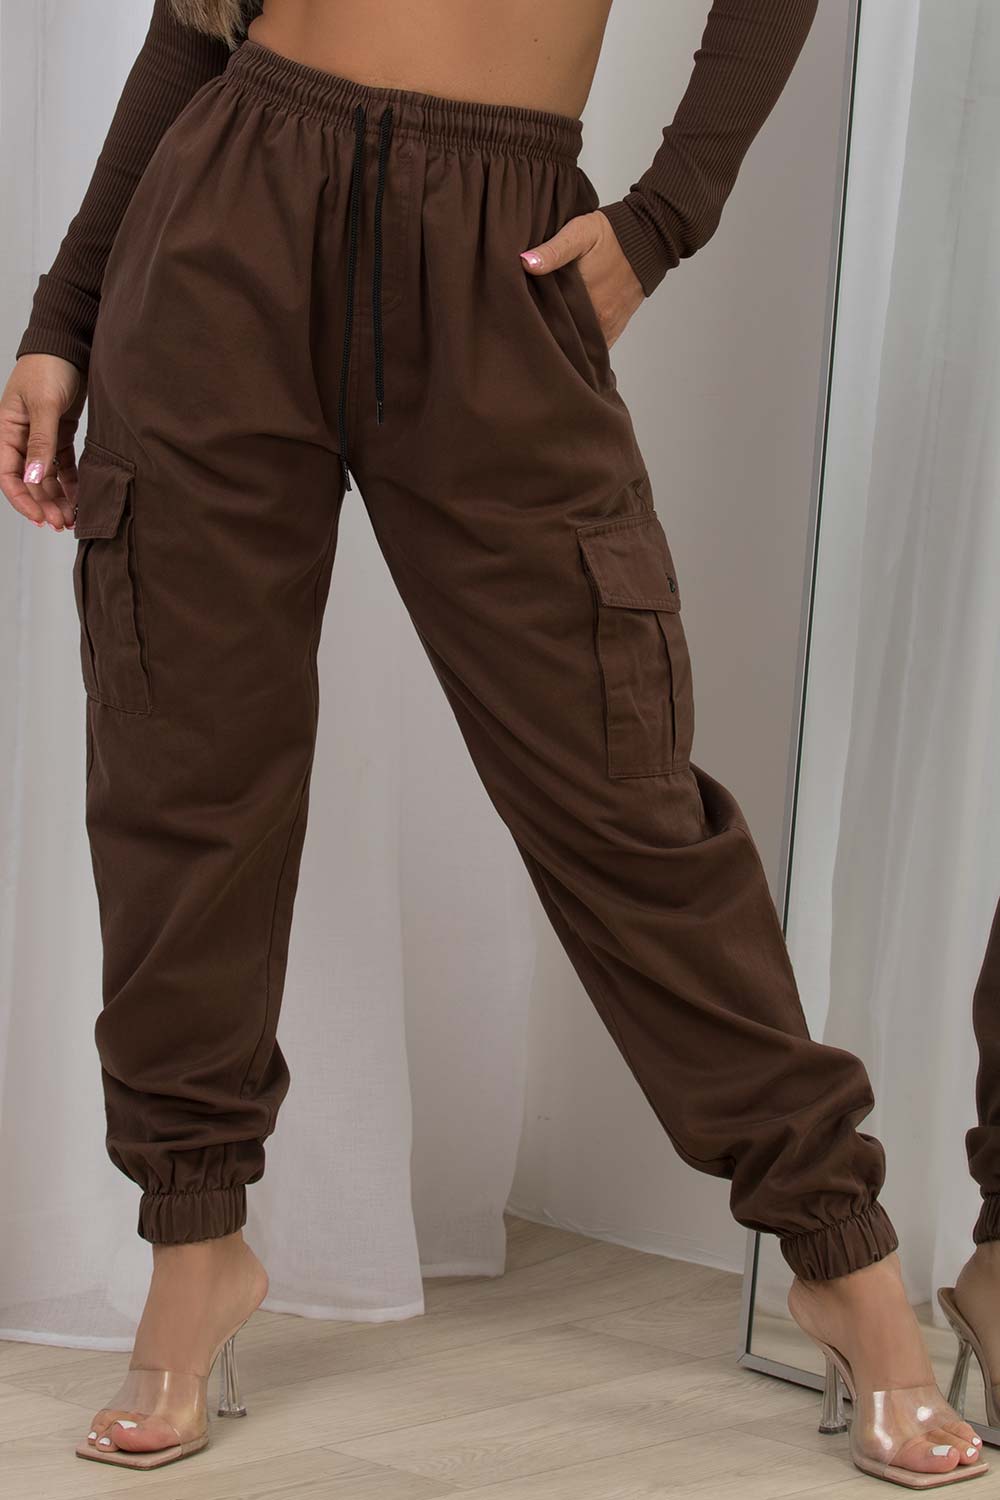 Pants with Cuffs for Women  Sumissura